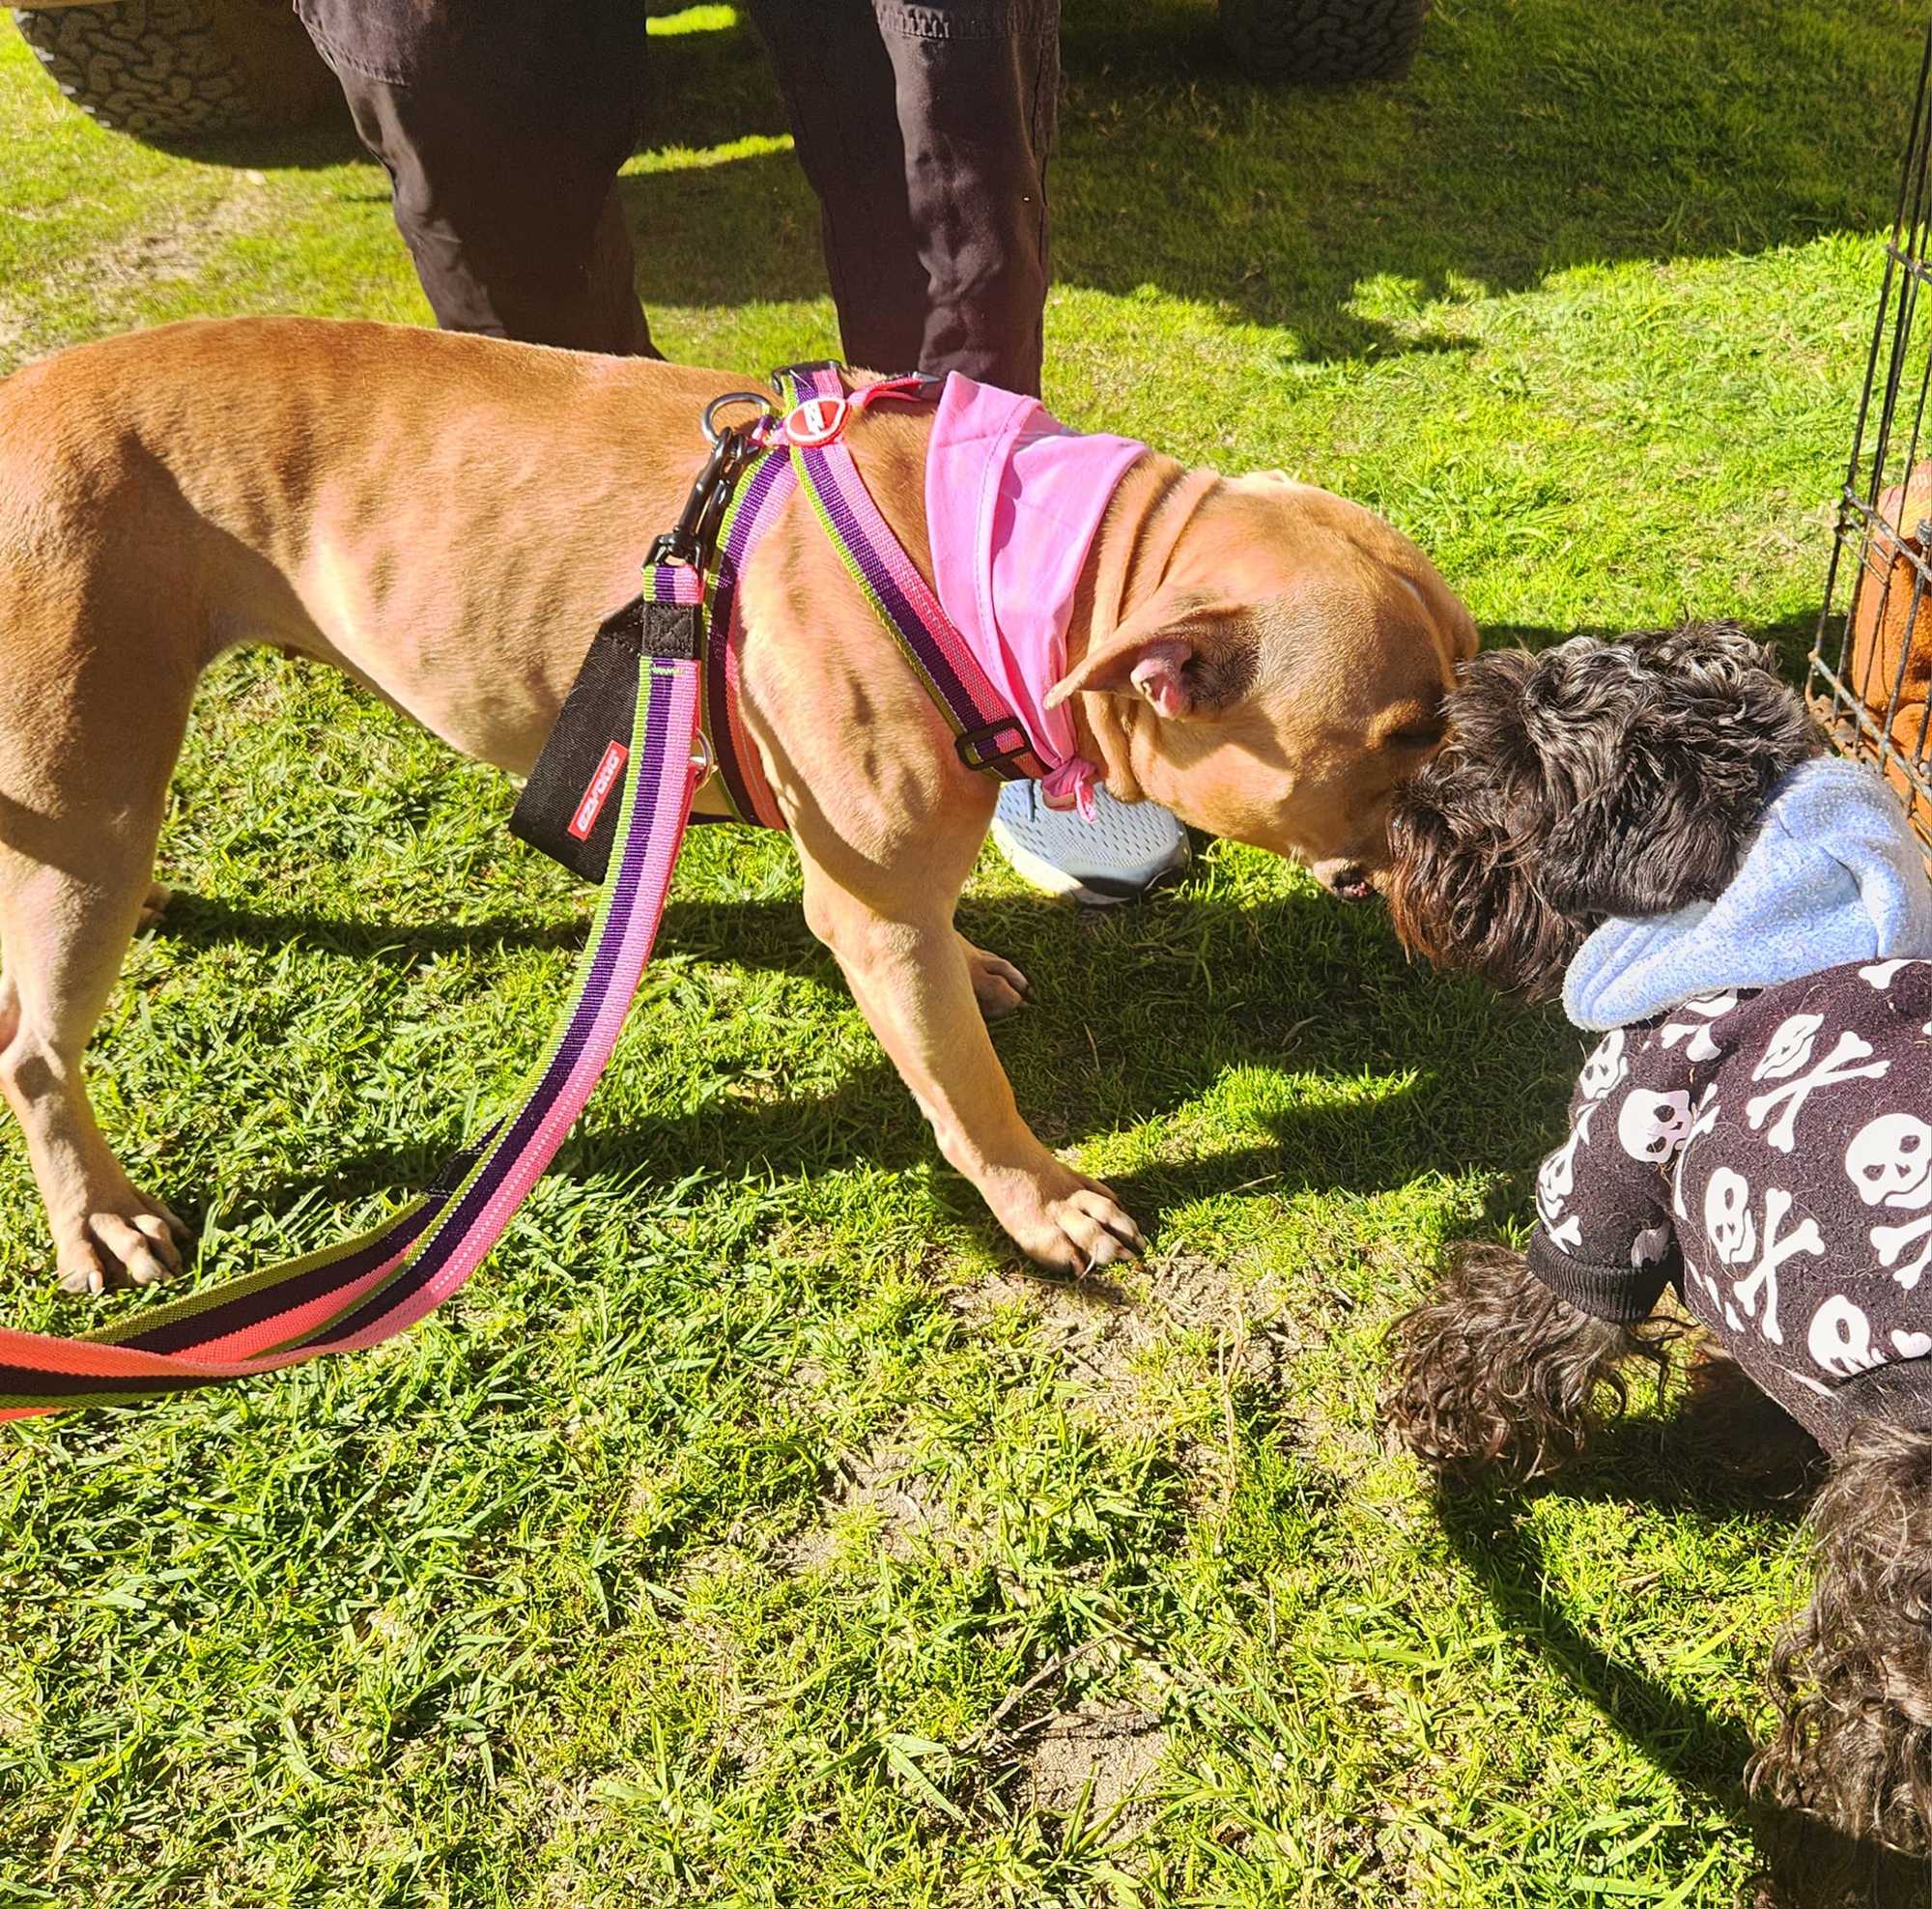 Brown dog and black dog sniffing each other wearing colourful accessories